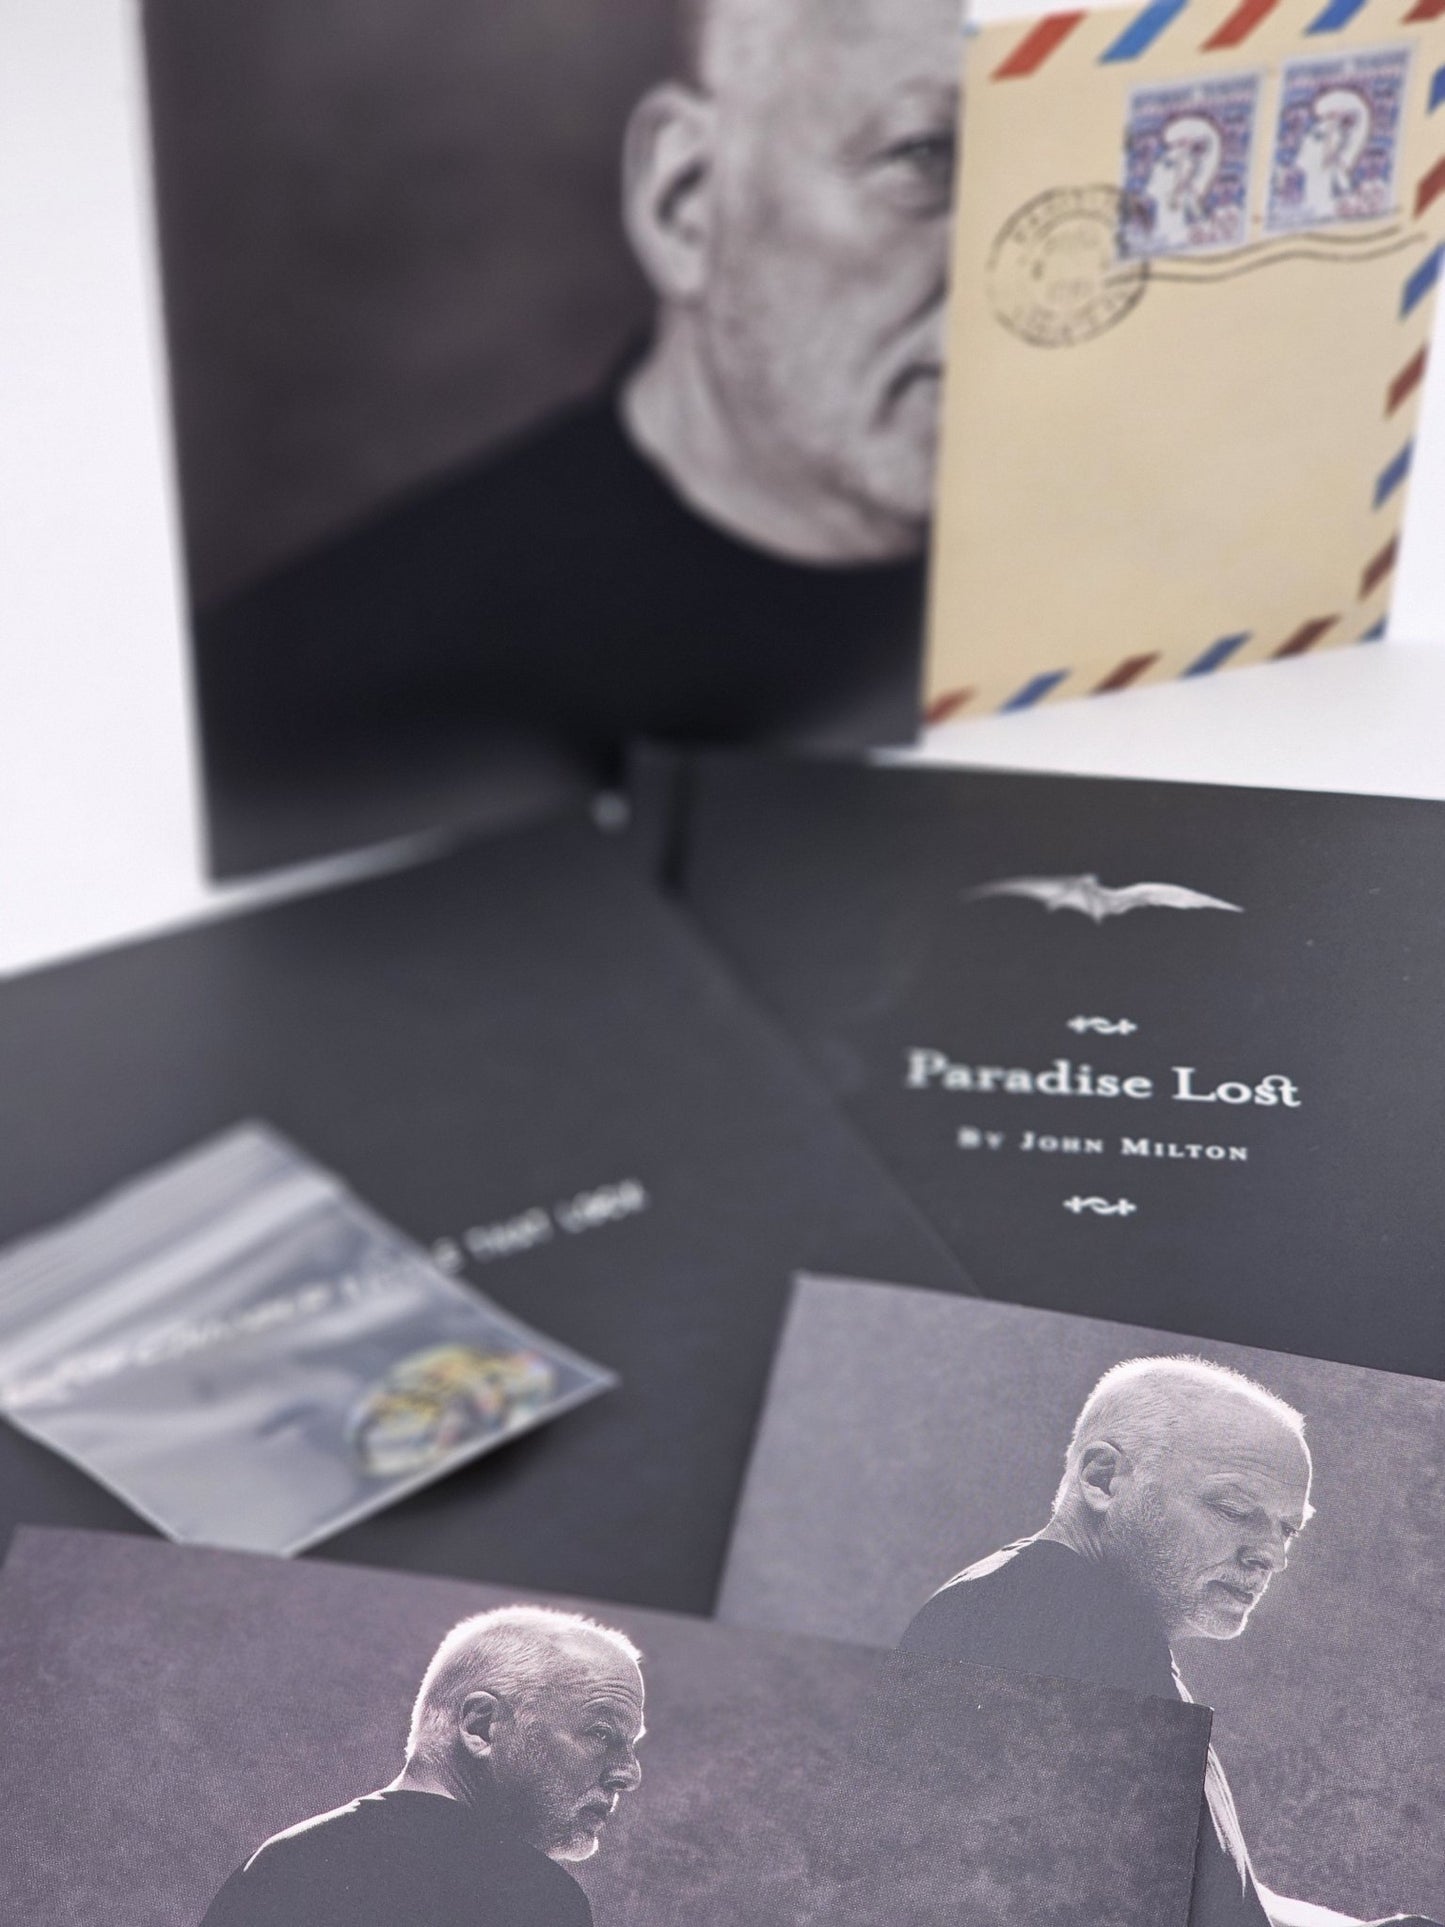 Columbia Records - David Gilmour | Rattle That Lock | CD/DVD Set - Compact Disc - Steady Bunny Shop